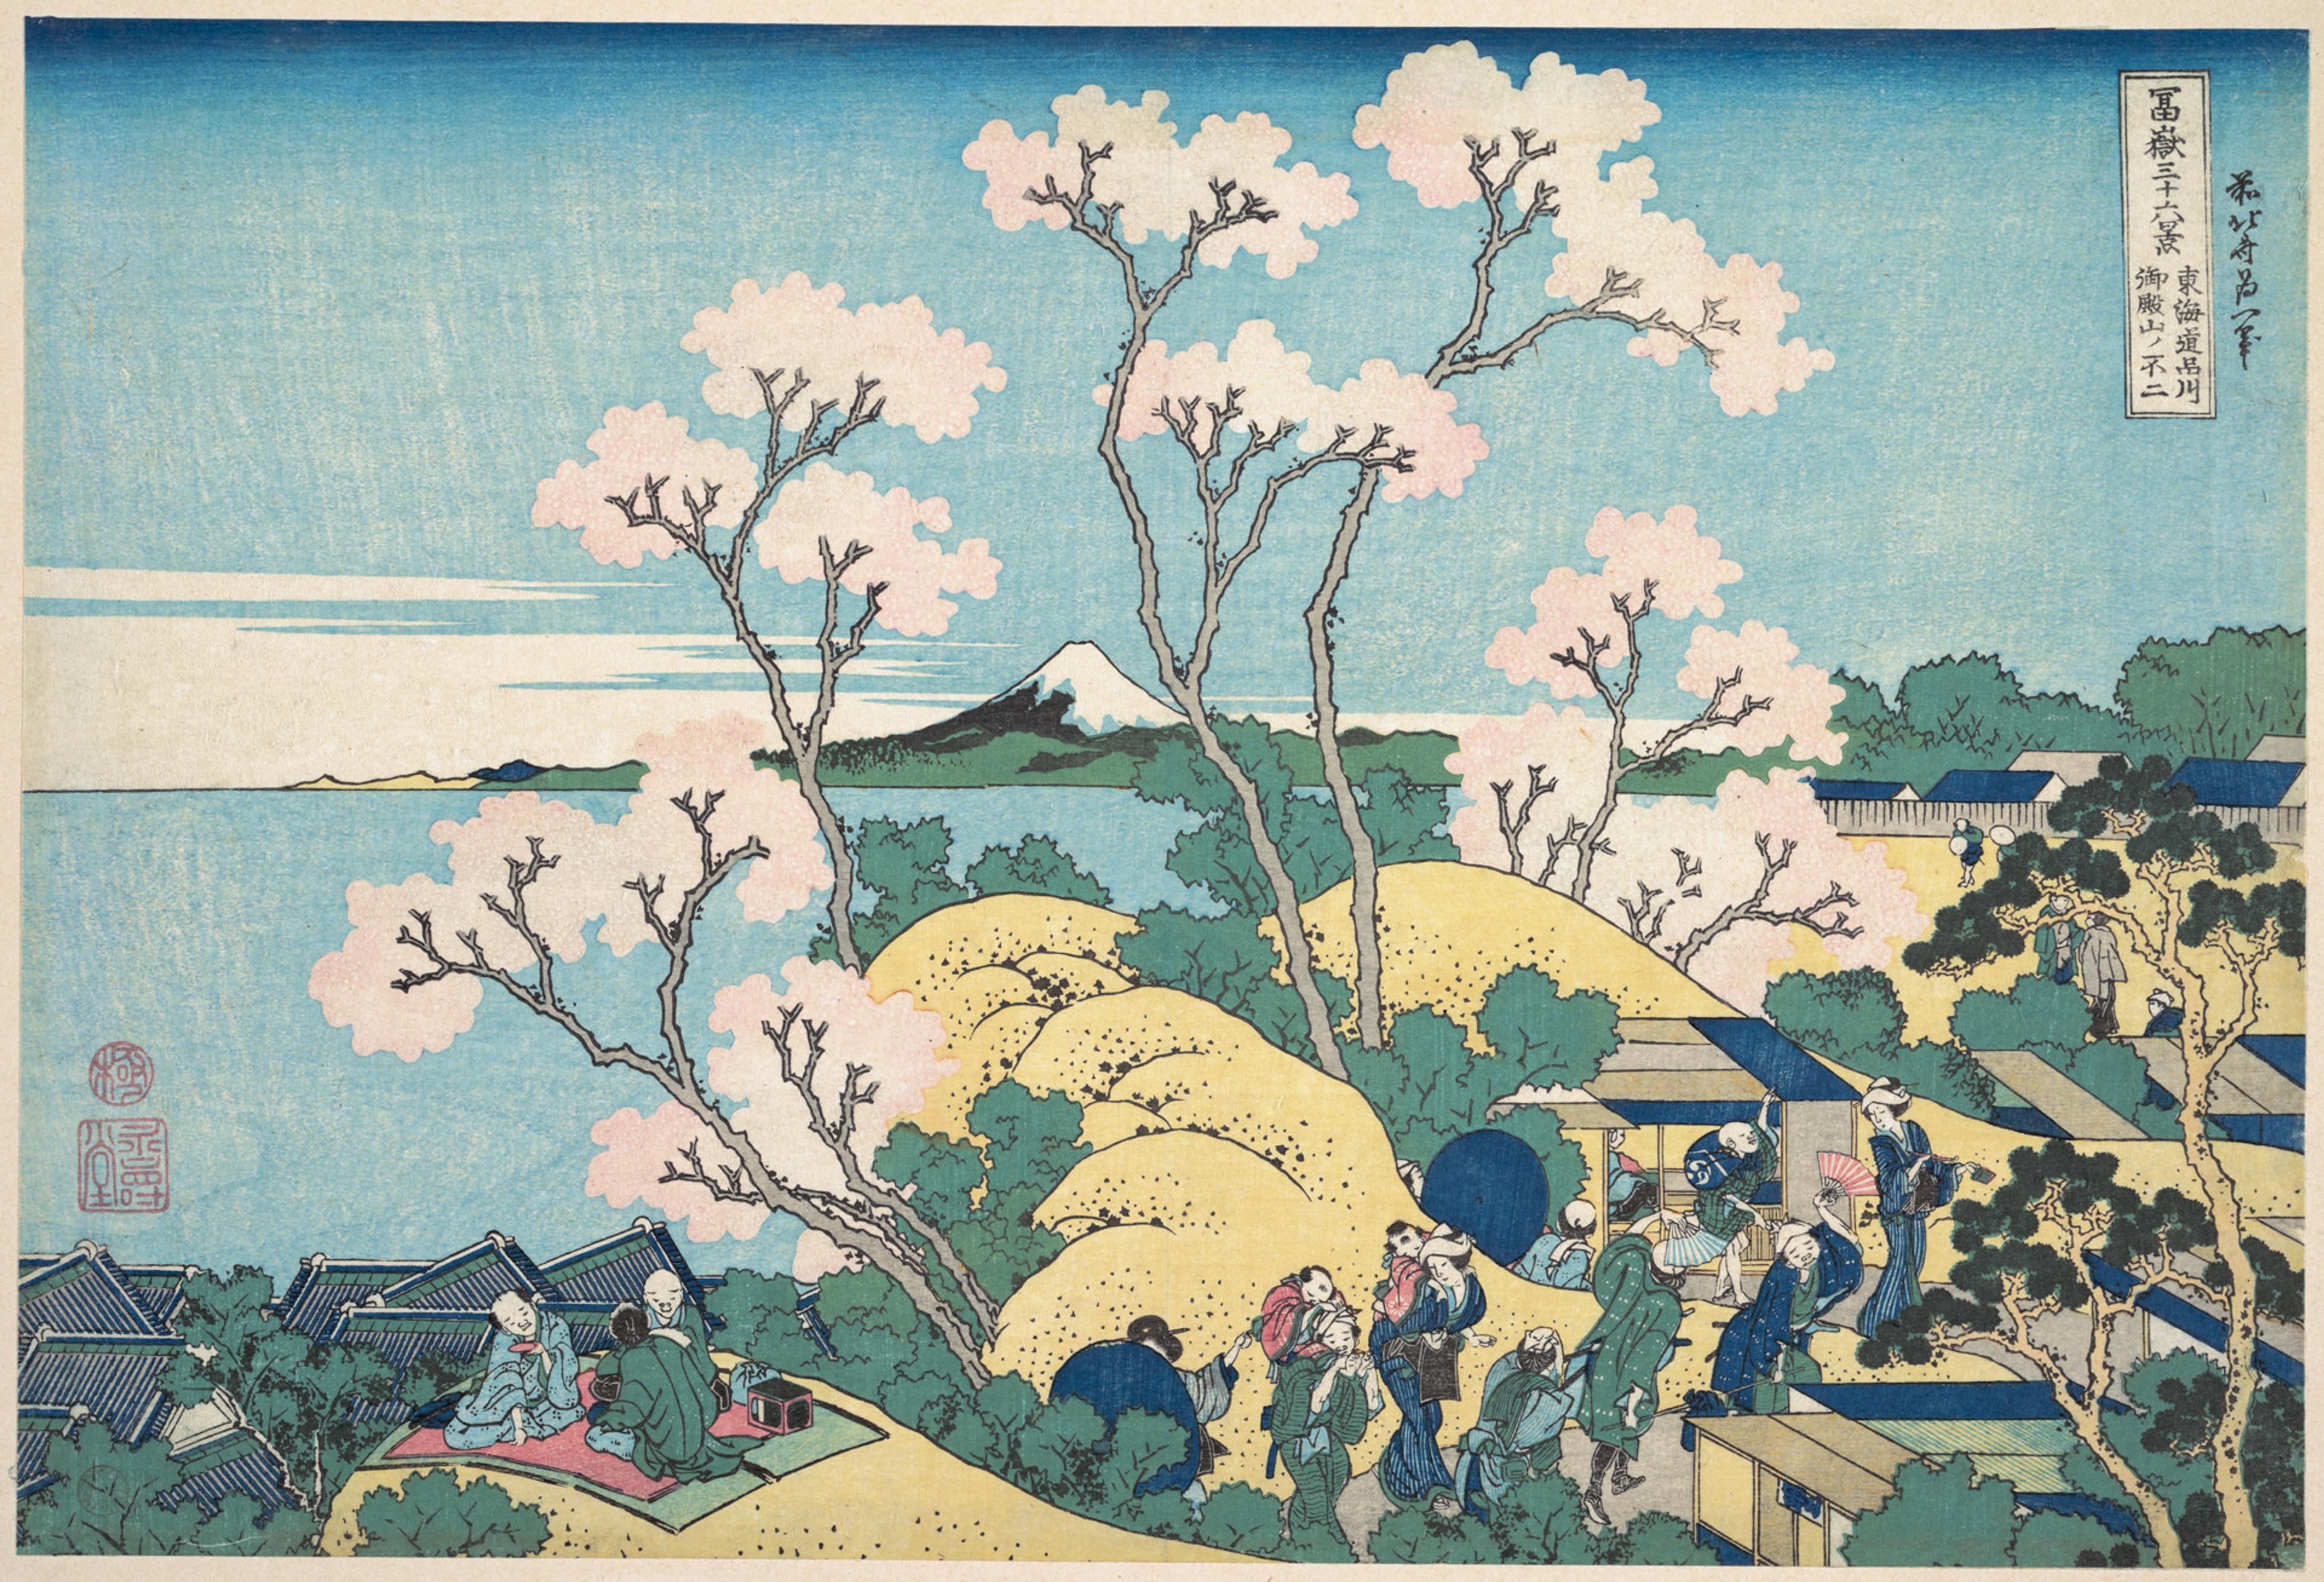 Woodcut print of a marsh with lush foliage, rendered in various shades of green and blue. Mount Fuji is visible in the distance, standing serenely next to a large body of water.